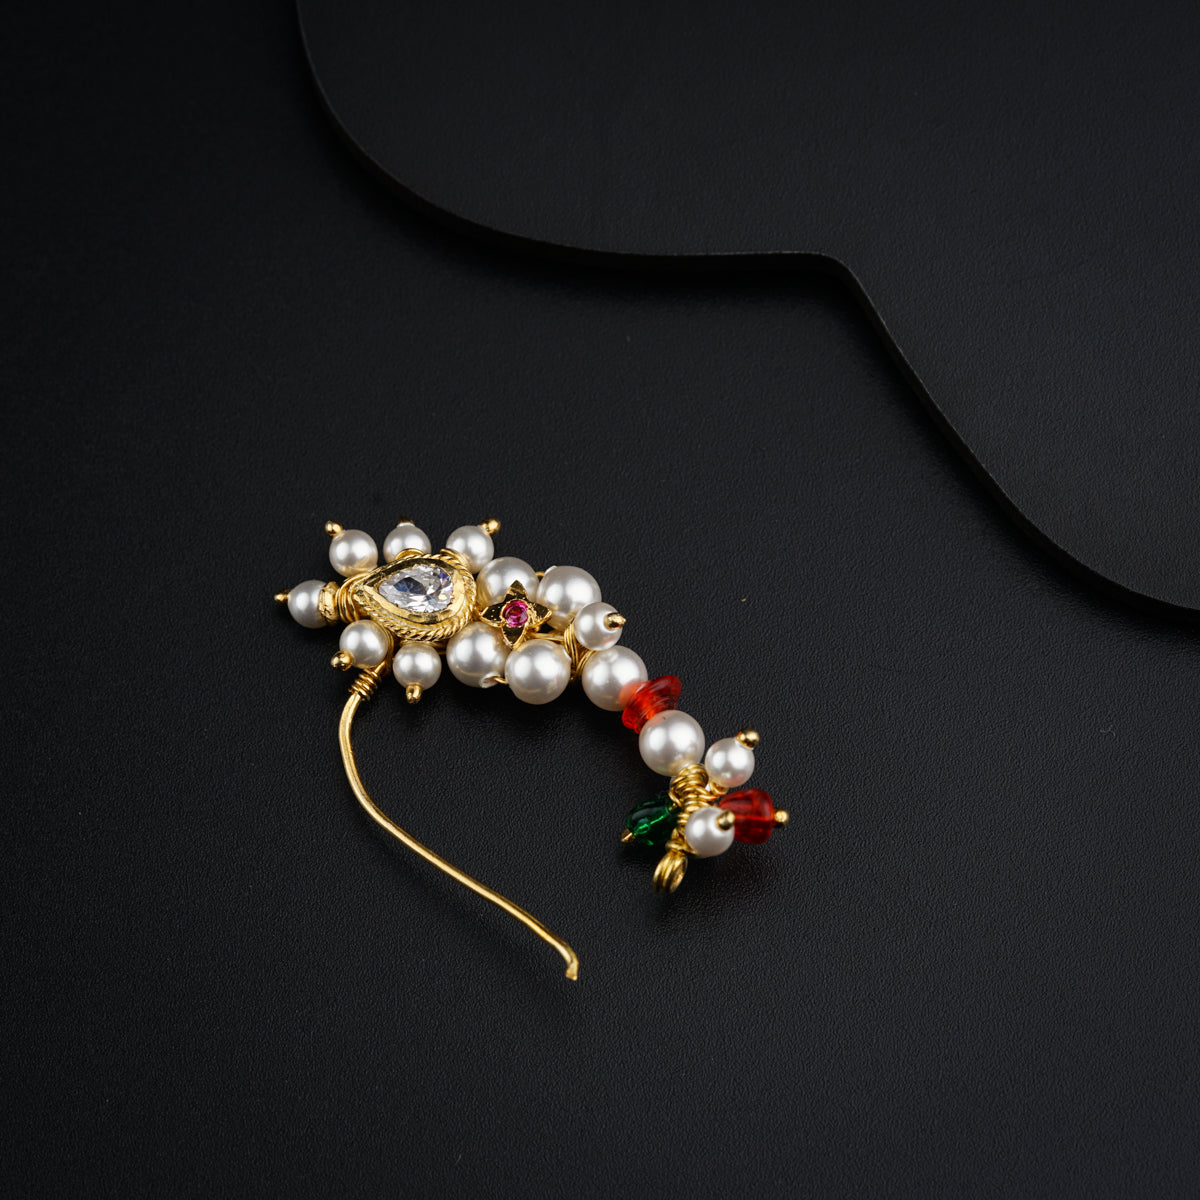 a brooch with a bunch of pearls on it